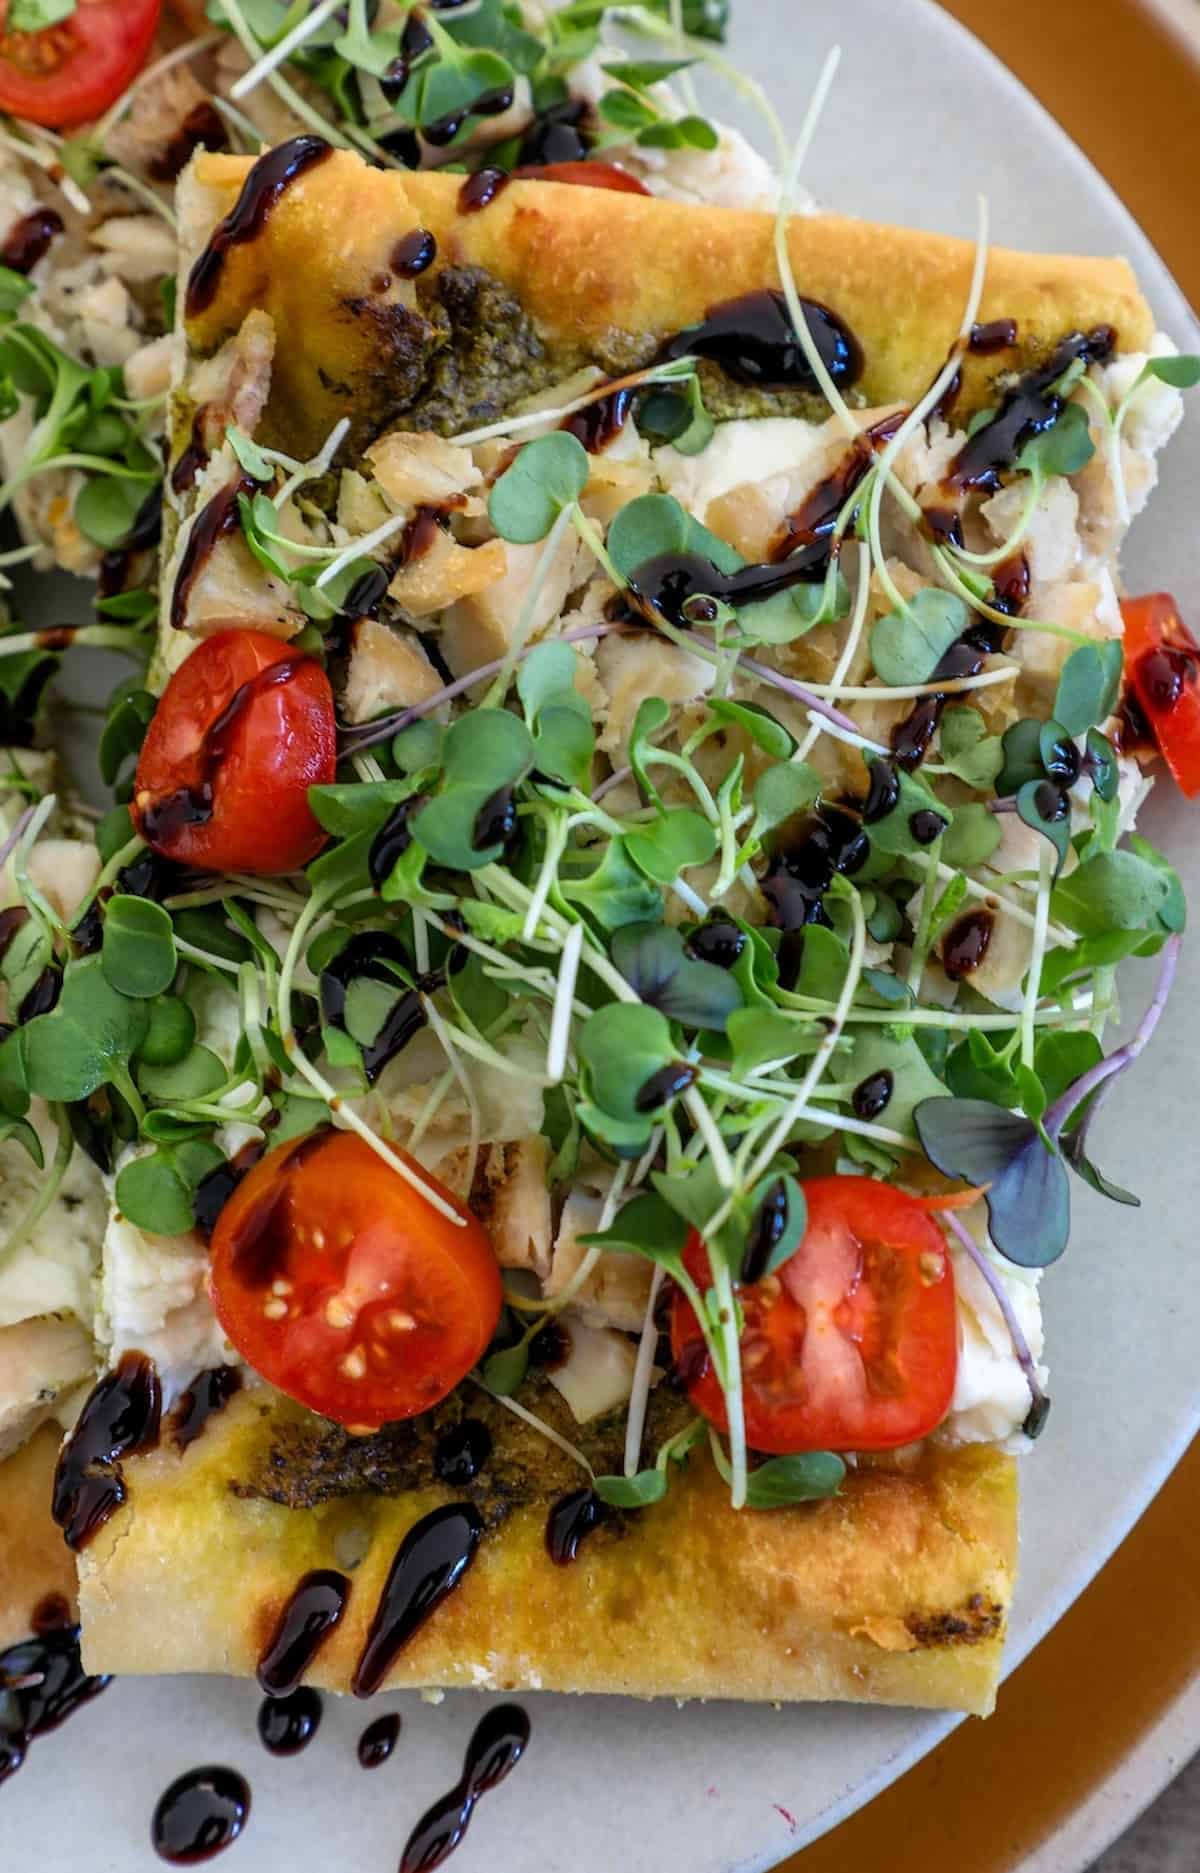 A flatbread pizza with tomatoes and greens on a plate.